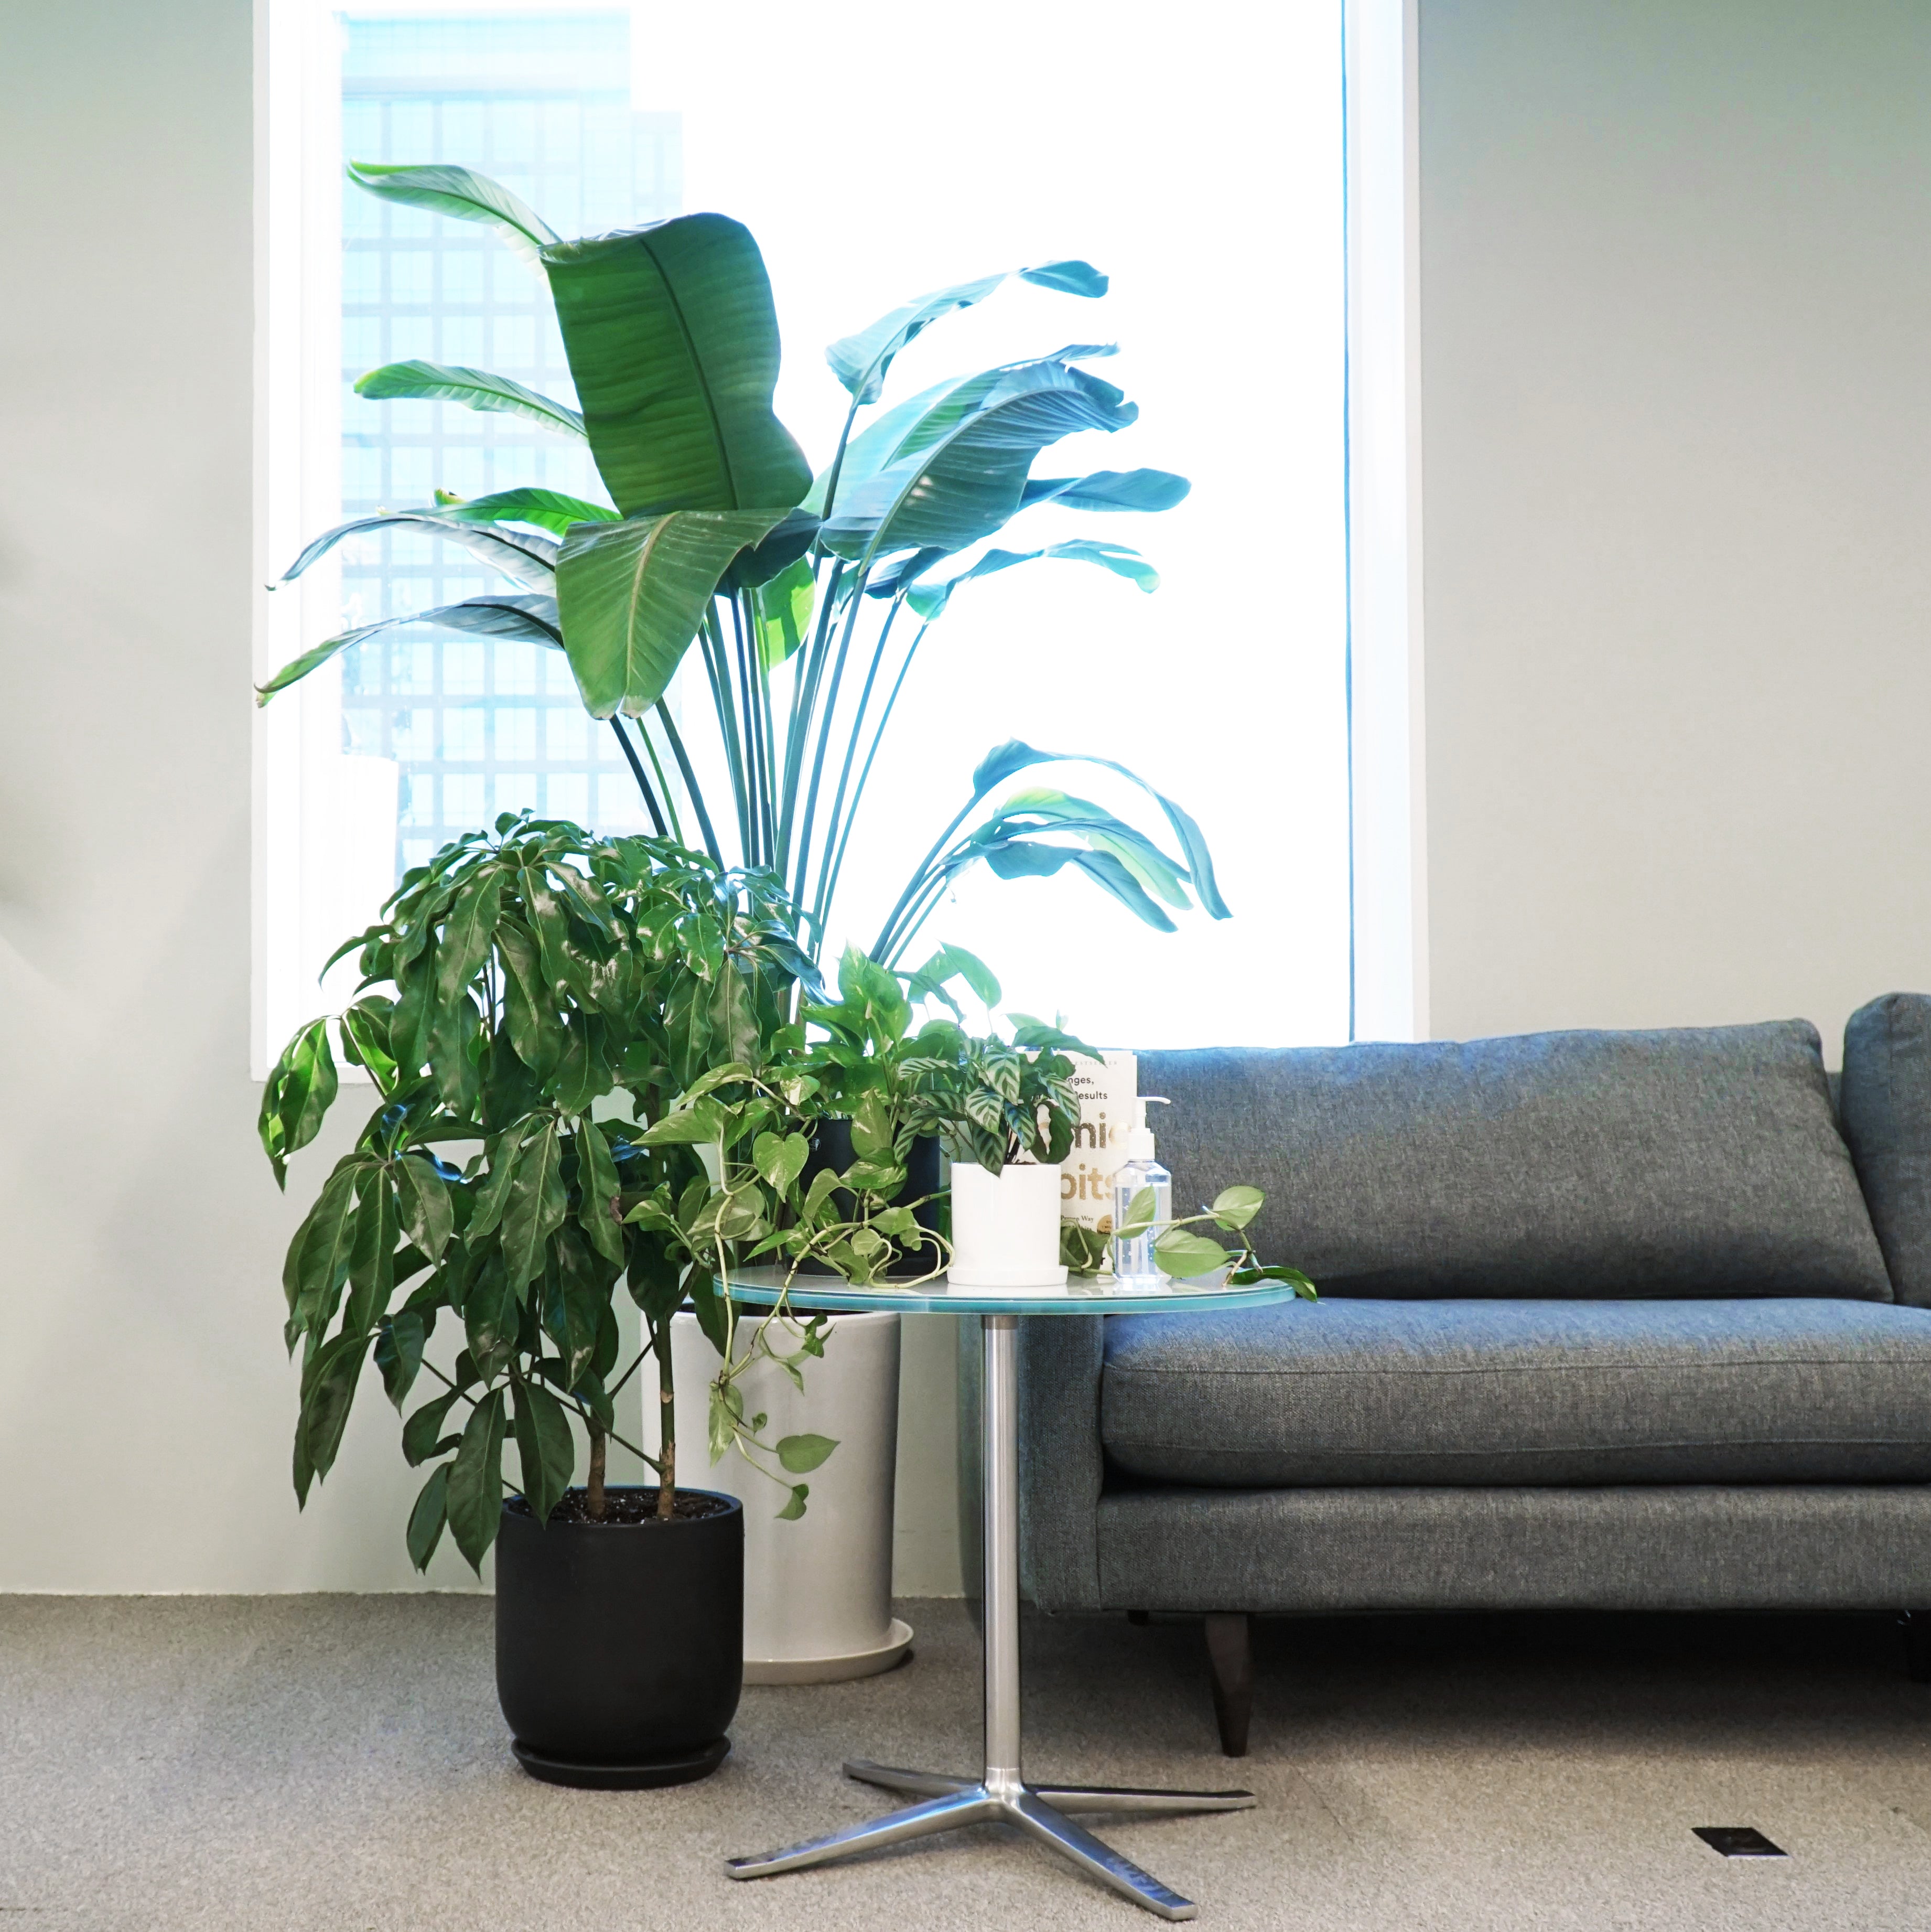 3 Reasons to Get Houseplants In Your New Apartment